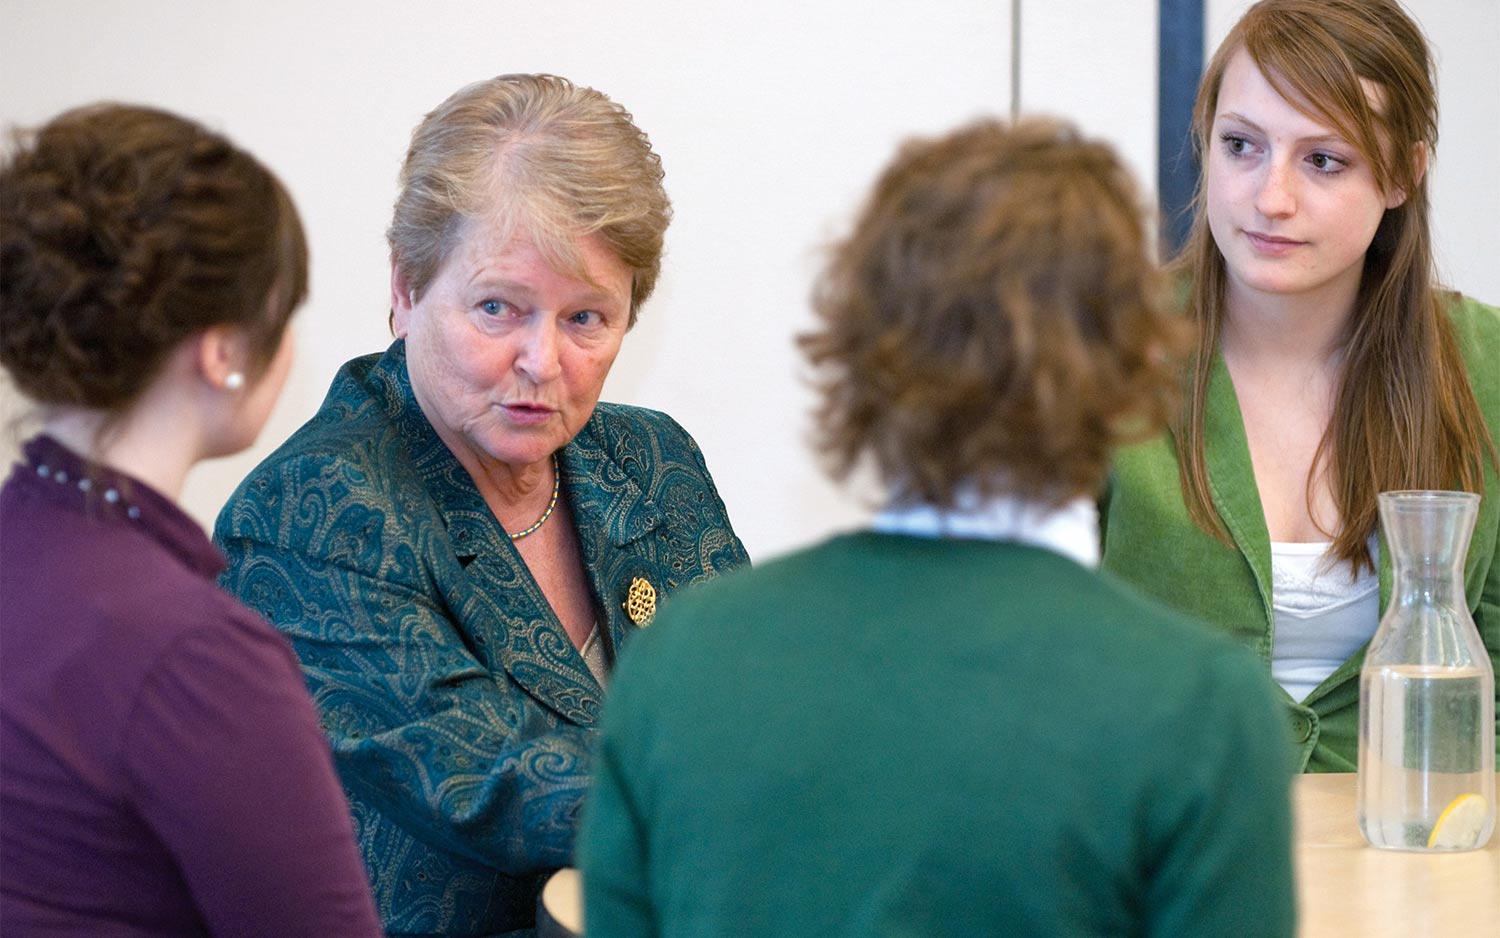 A professional older woman speaking with younger women at a table